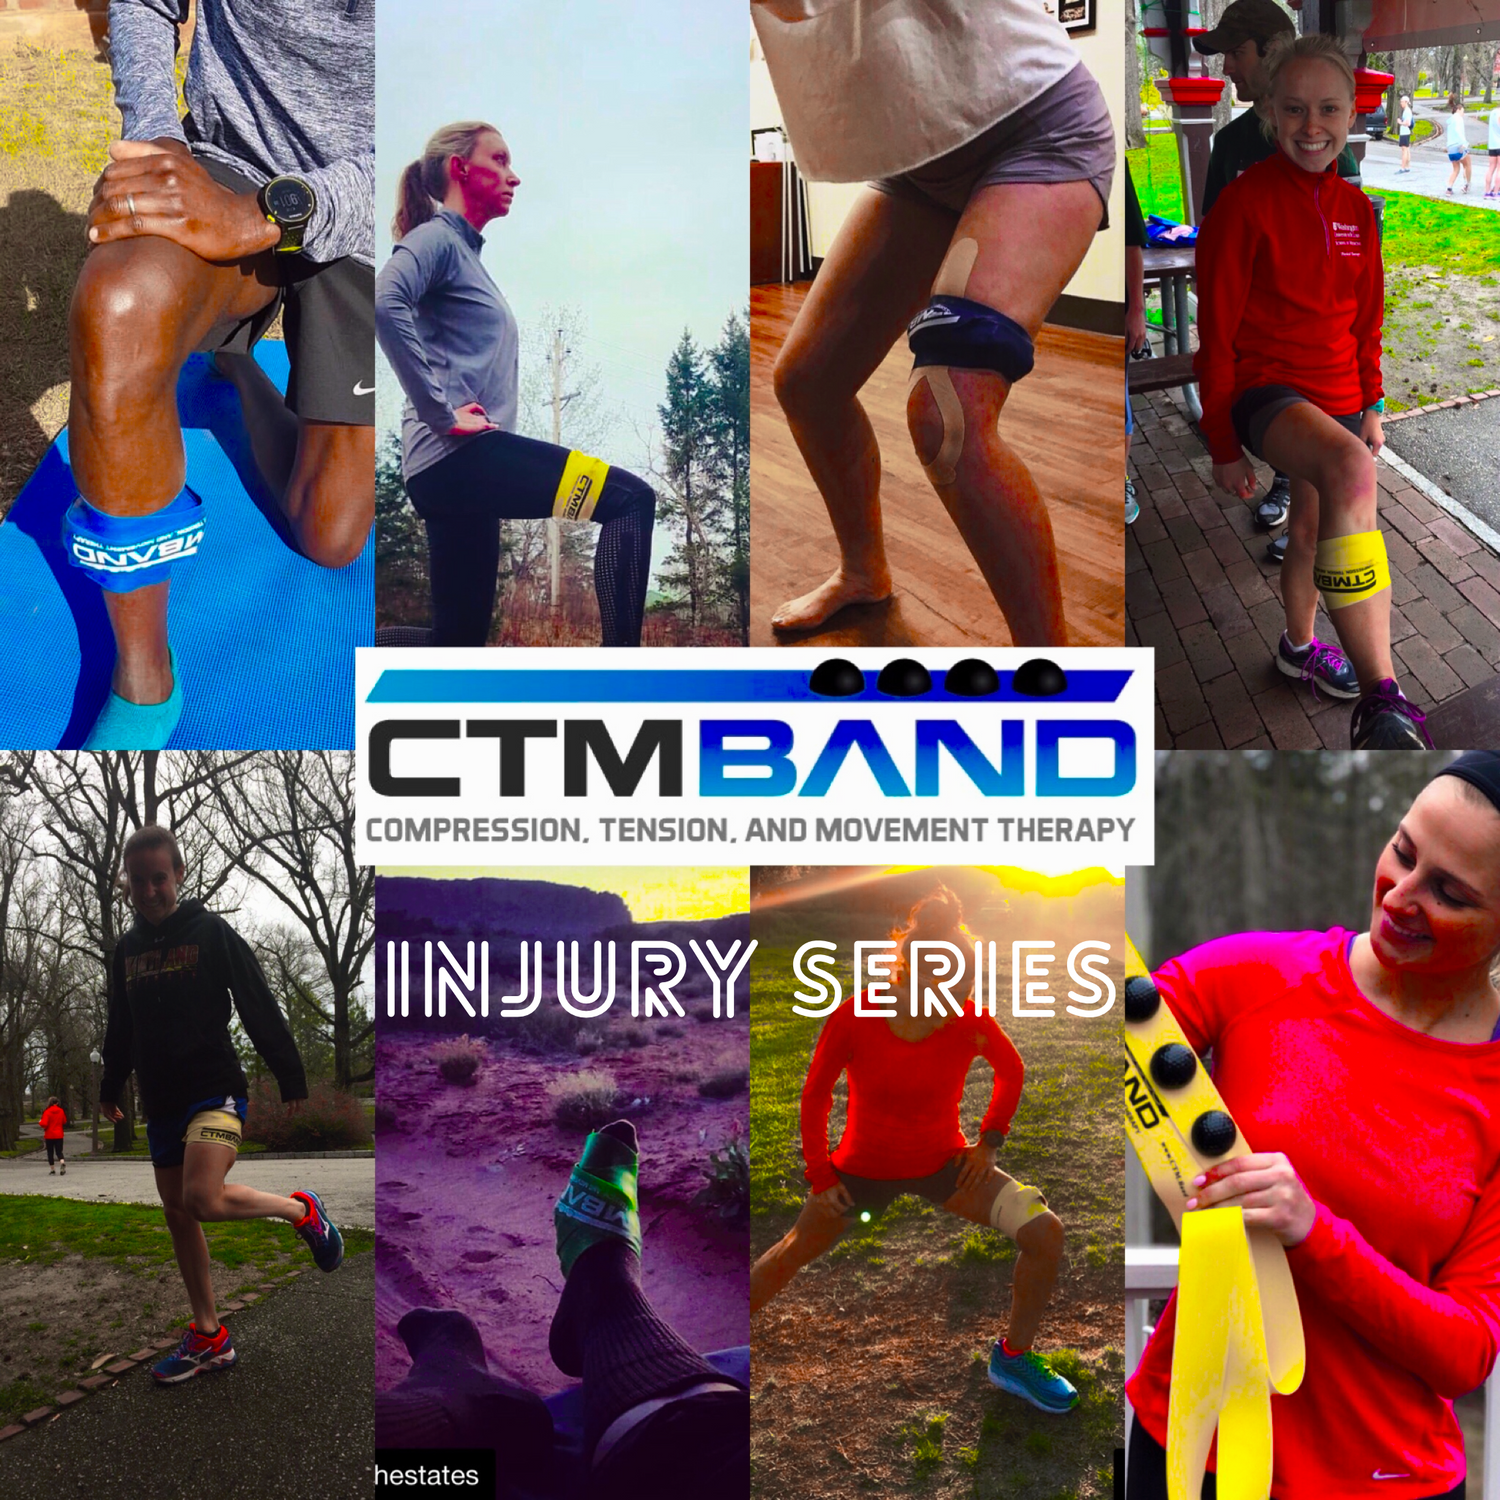 Image. The CTM Band is a soft tissue massage tool, achilles massage tool, hamstring massage tool, etc. It helps with pain on top of kneecap, patellofemoral pain syndrome, sore knees from running and many others. Get rid of sore muscles fast.